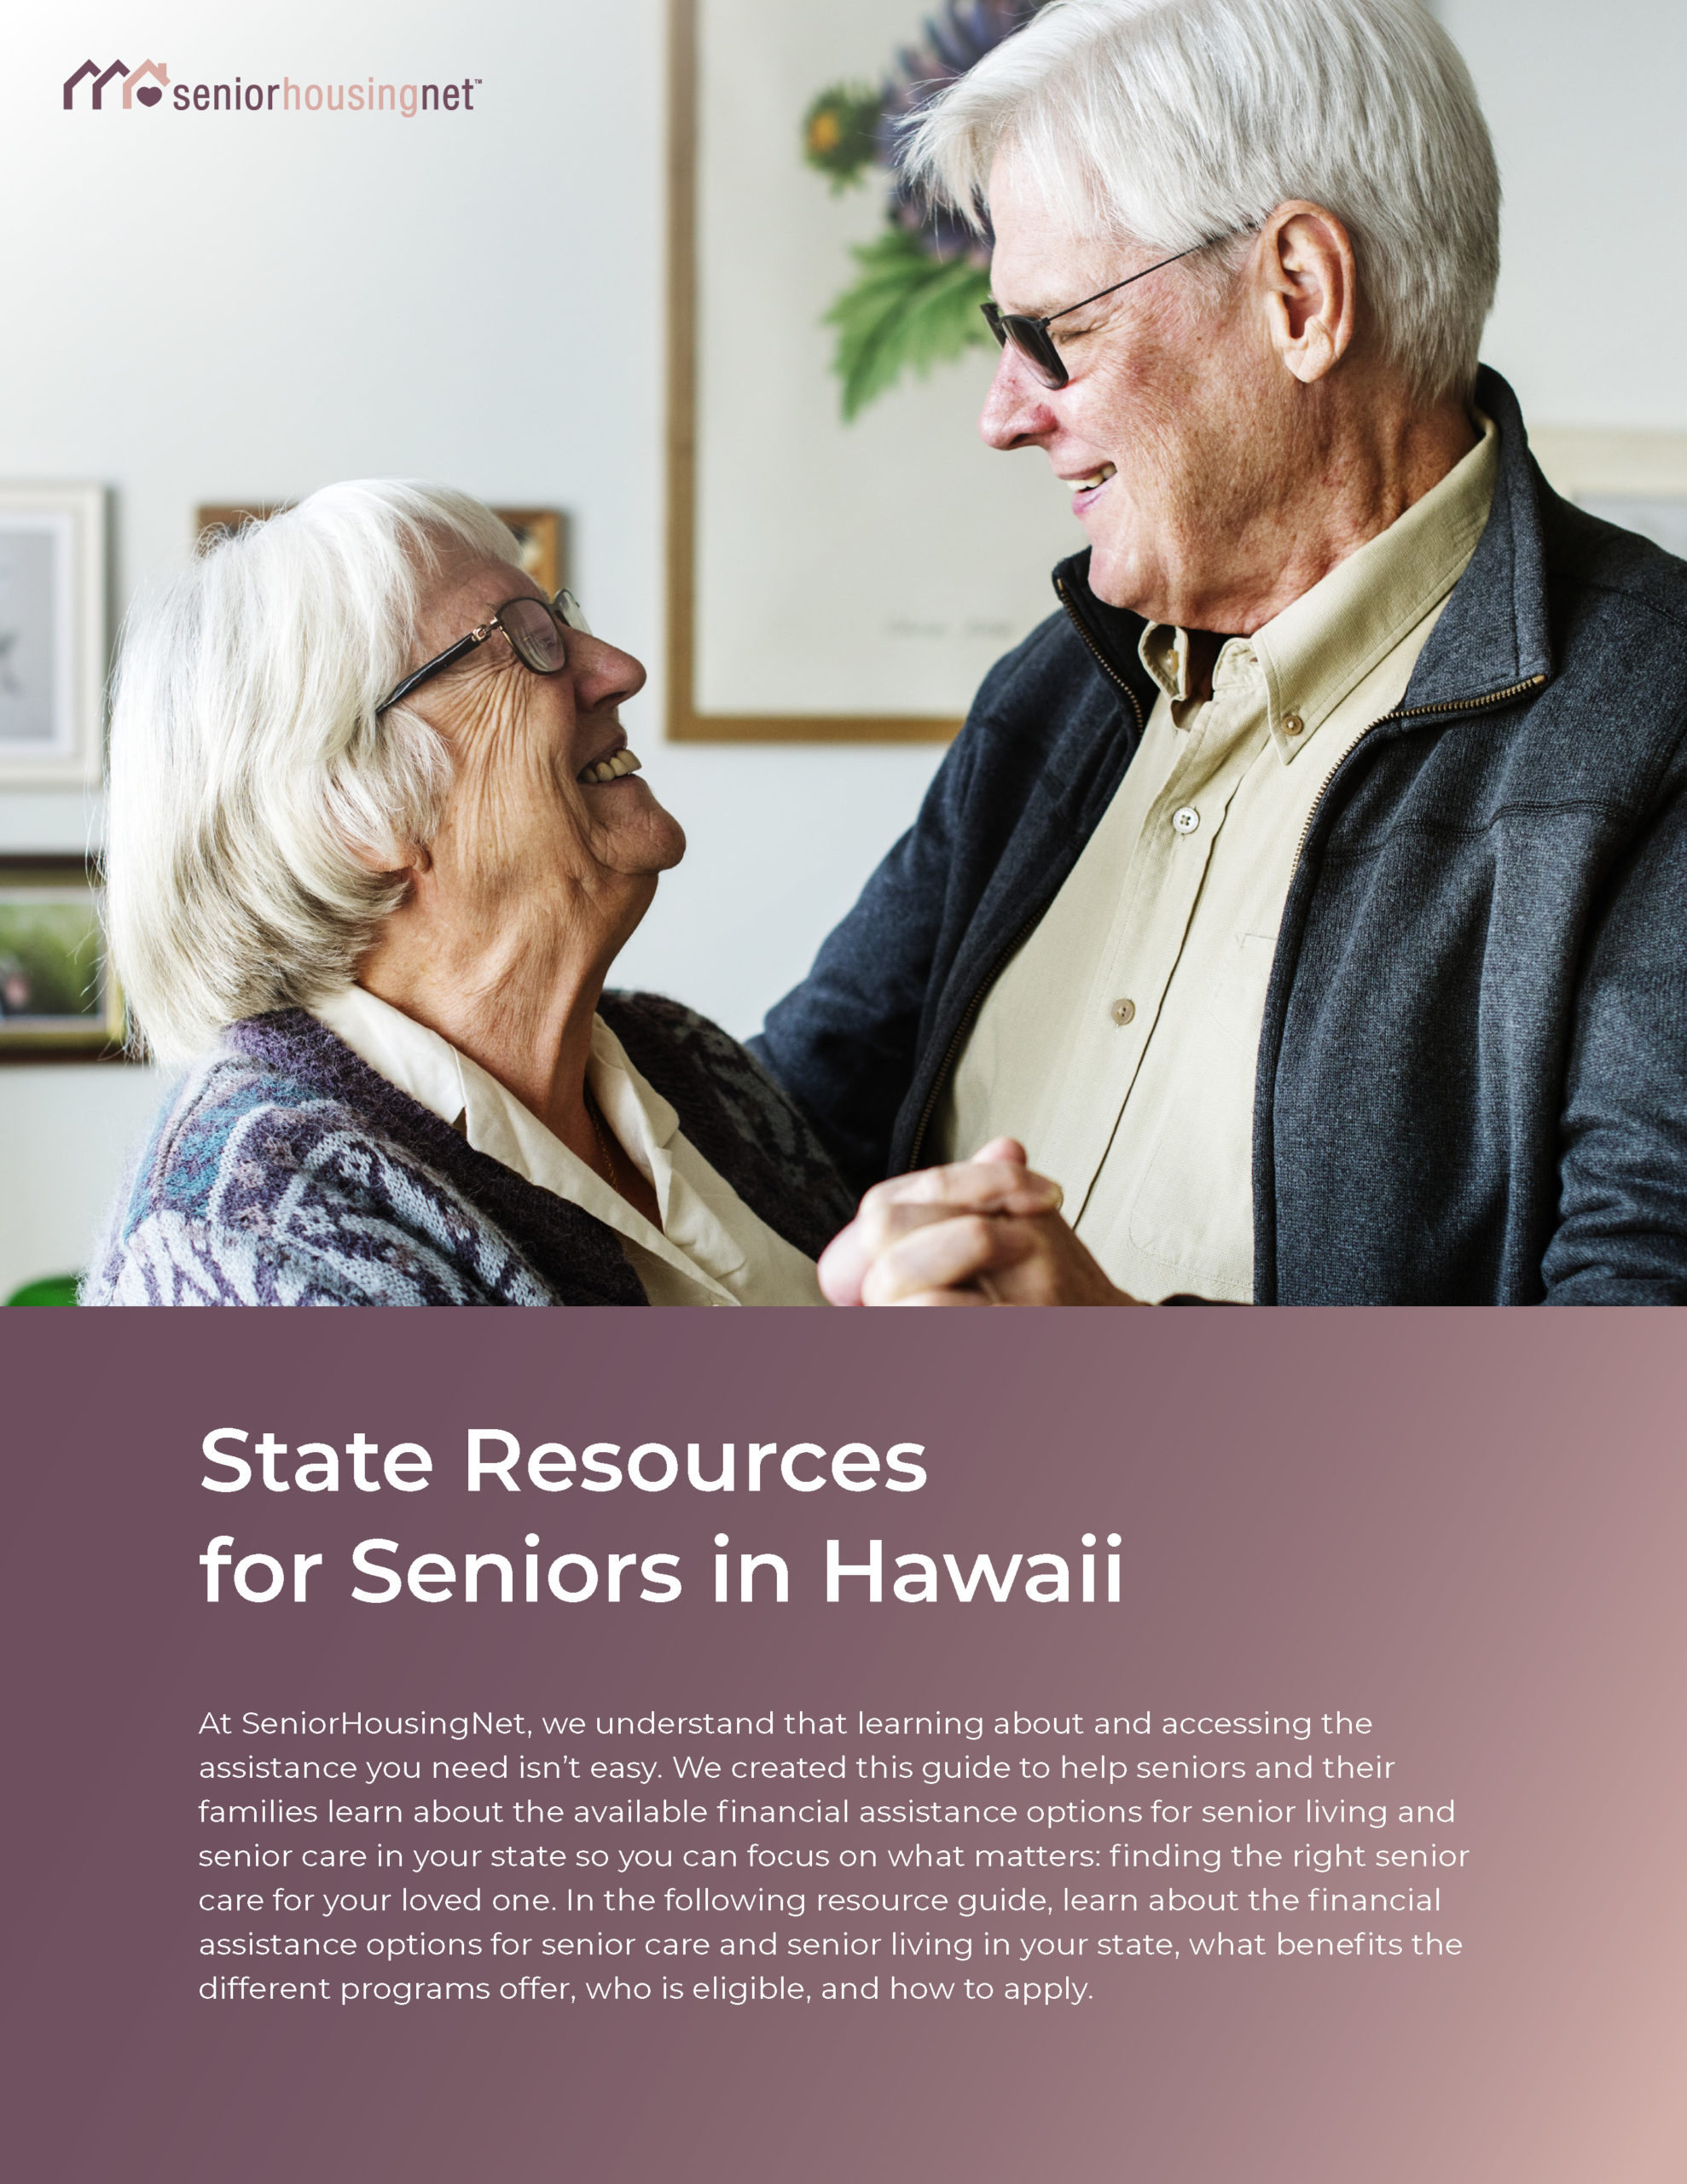 State Resources for Seniors in Hawaii